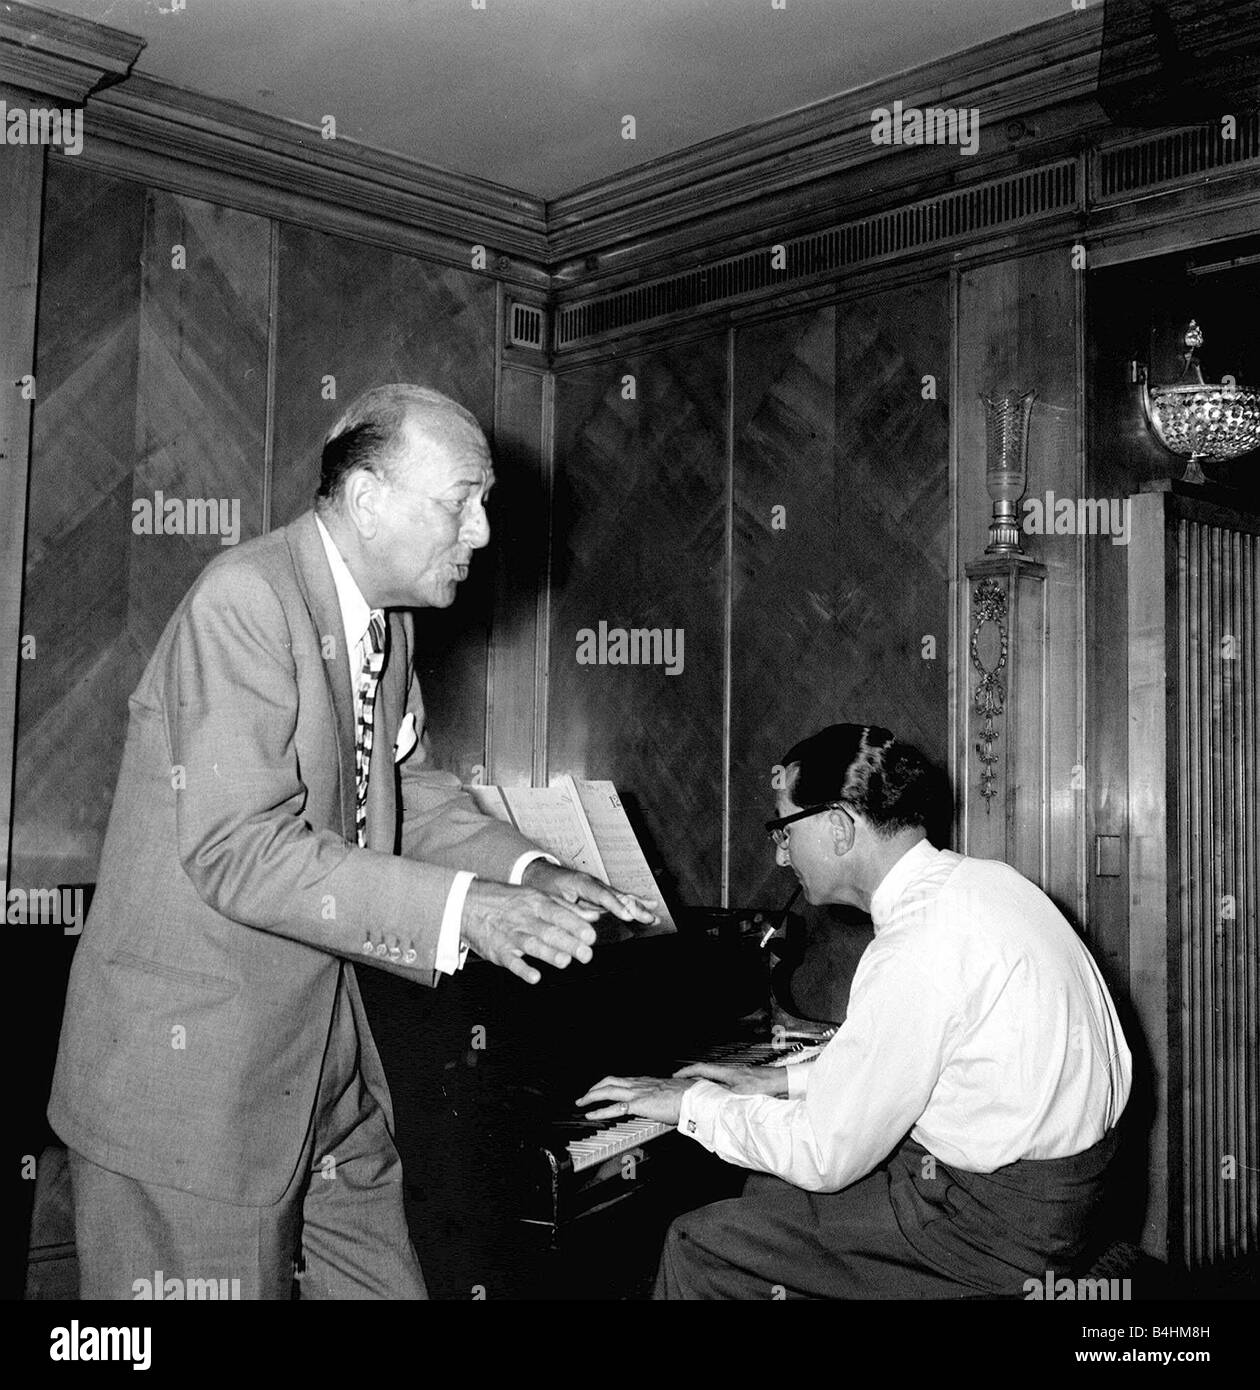 Noel Coward actor and playwright performing at the Dorchester Hotel London July 1958 Stock Photo